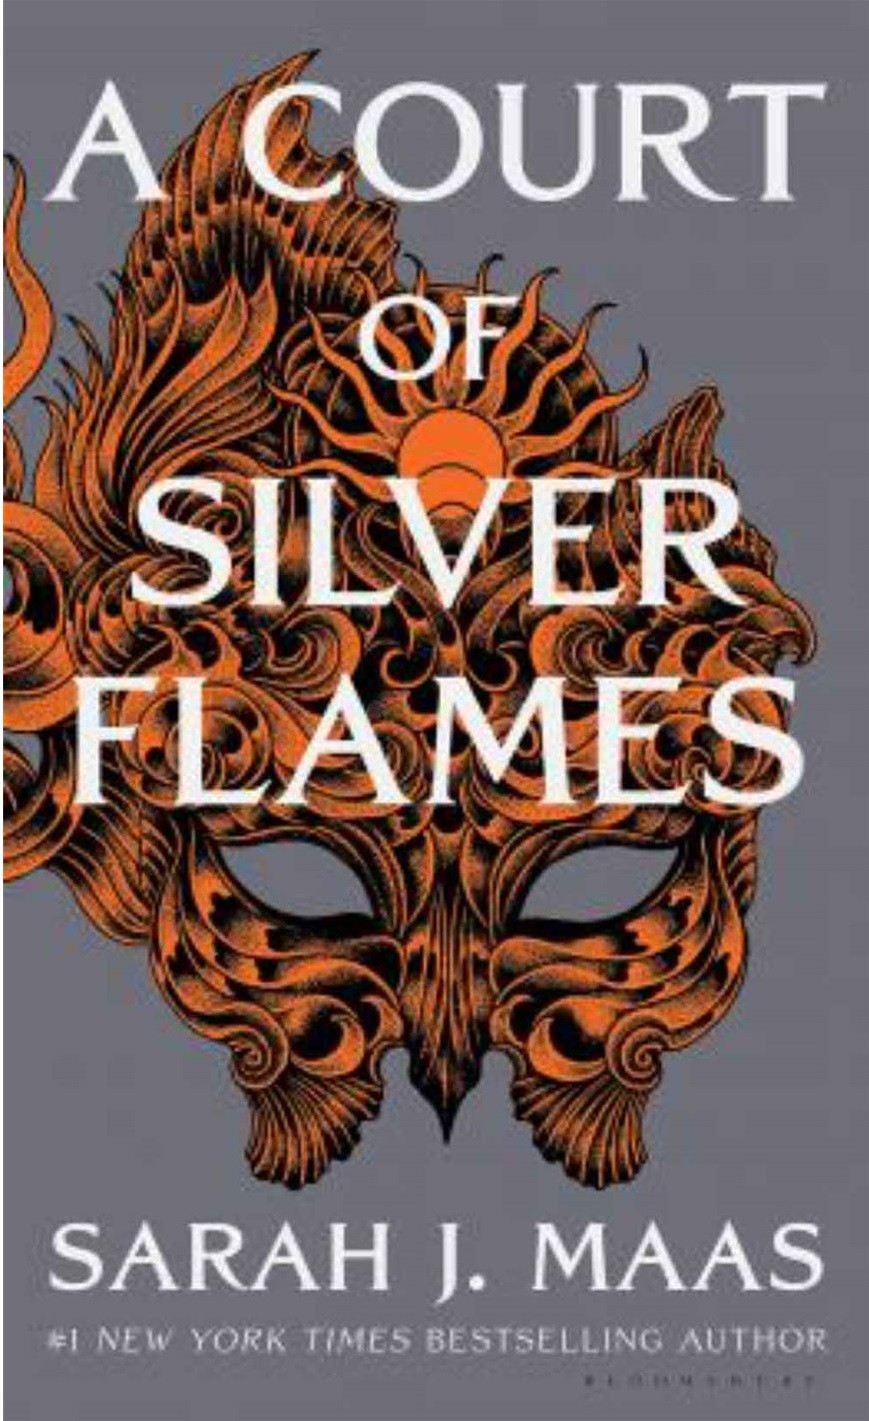 A court of silver flames